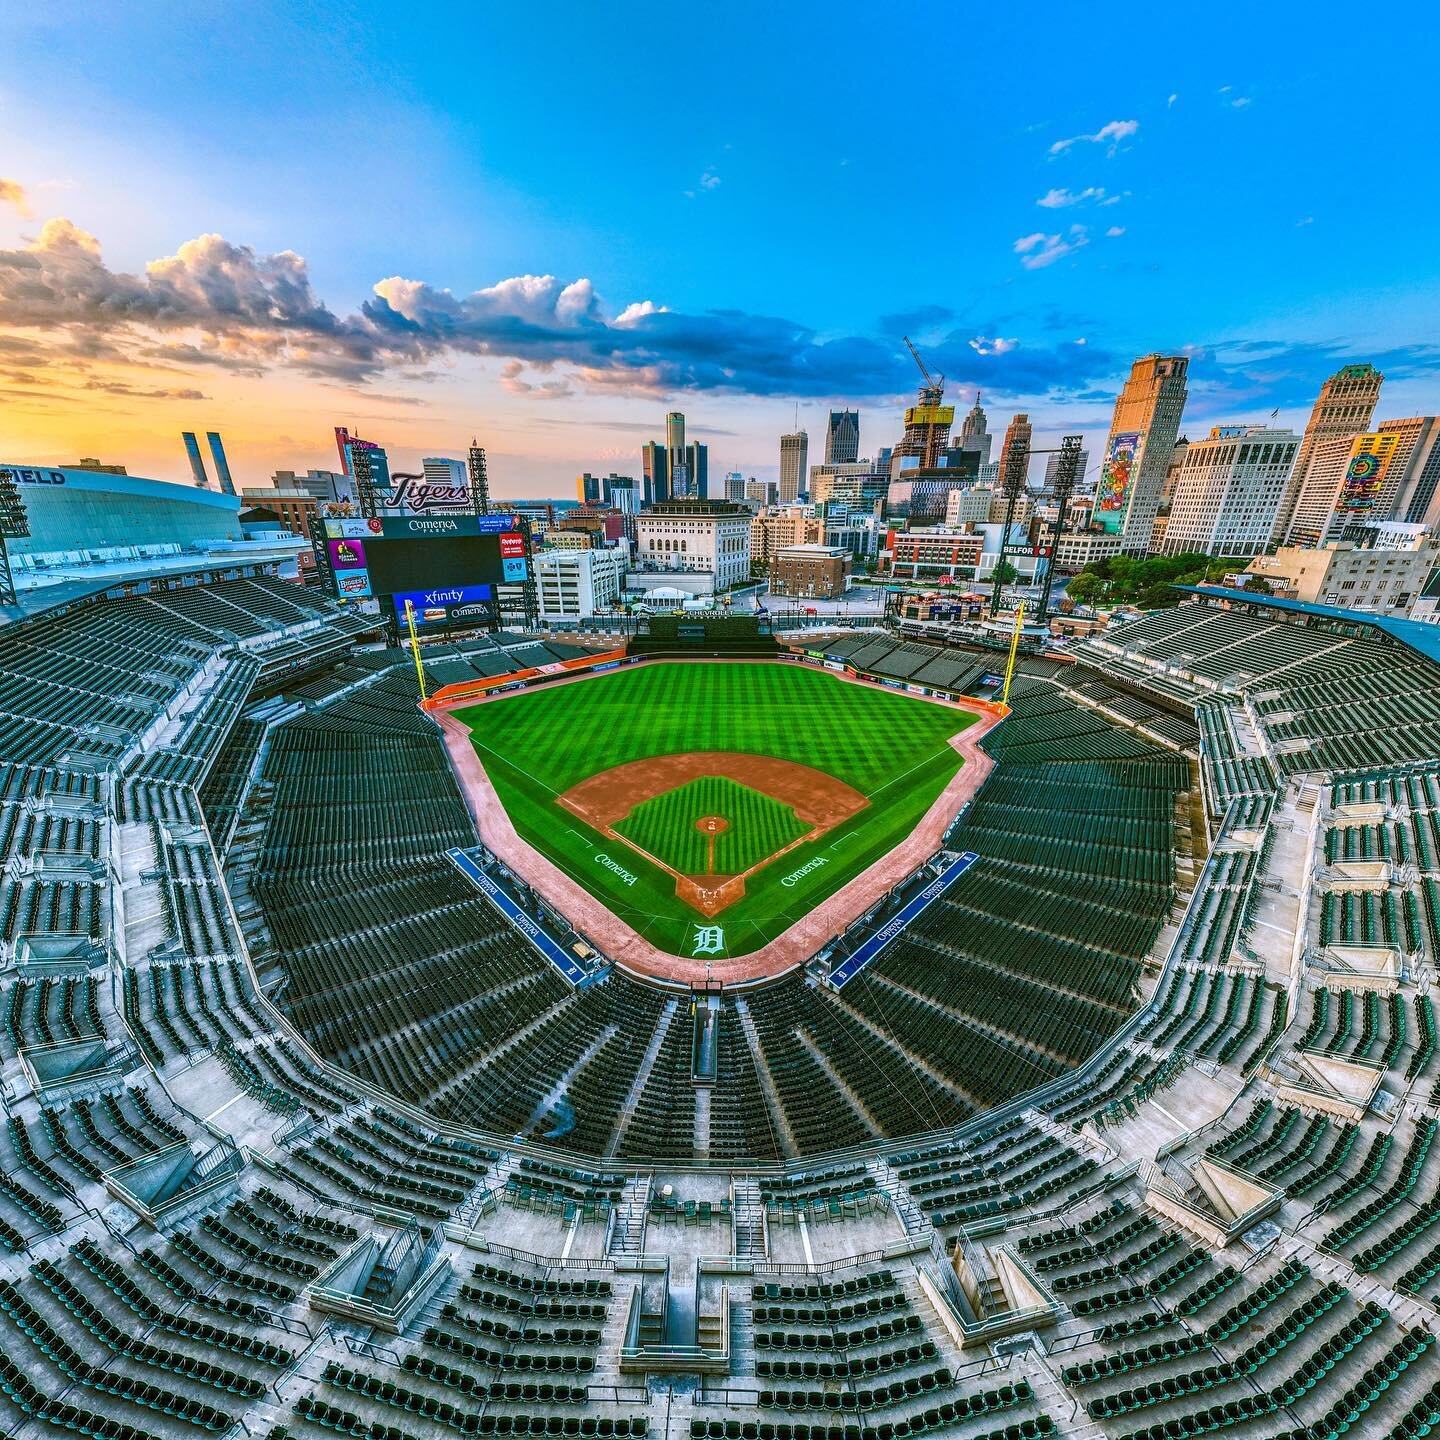 There&rsquo;s something perfect about empty stadiums.

Prints:
https://jonathangusandersphotography.shootproof.com/gallery/20948012/

Link in bio. 

#detroittigers #detroit #mlb #baseball #michigan #comericapark #stadiums #detroitphotographer #dronep